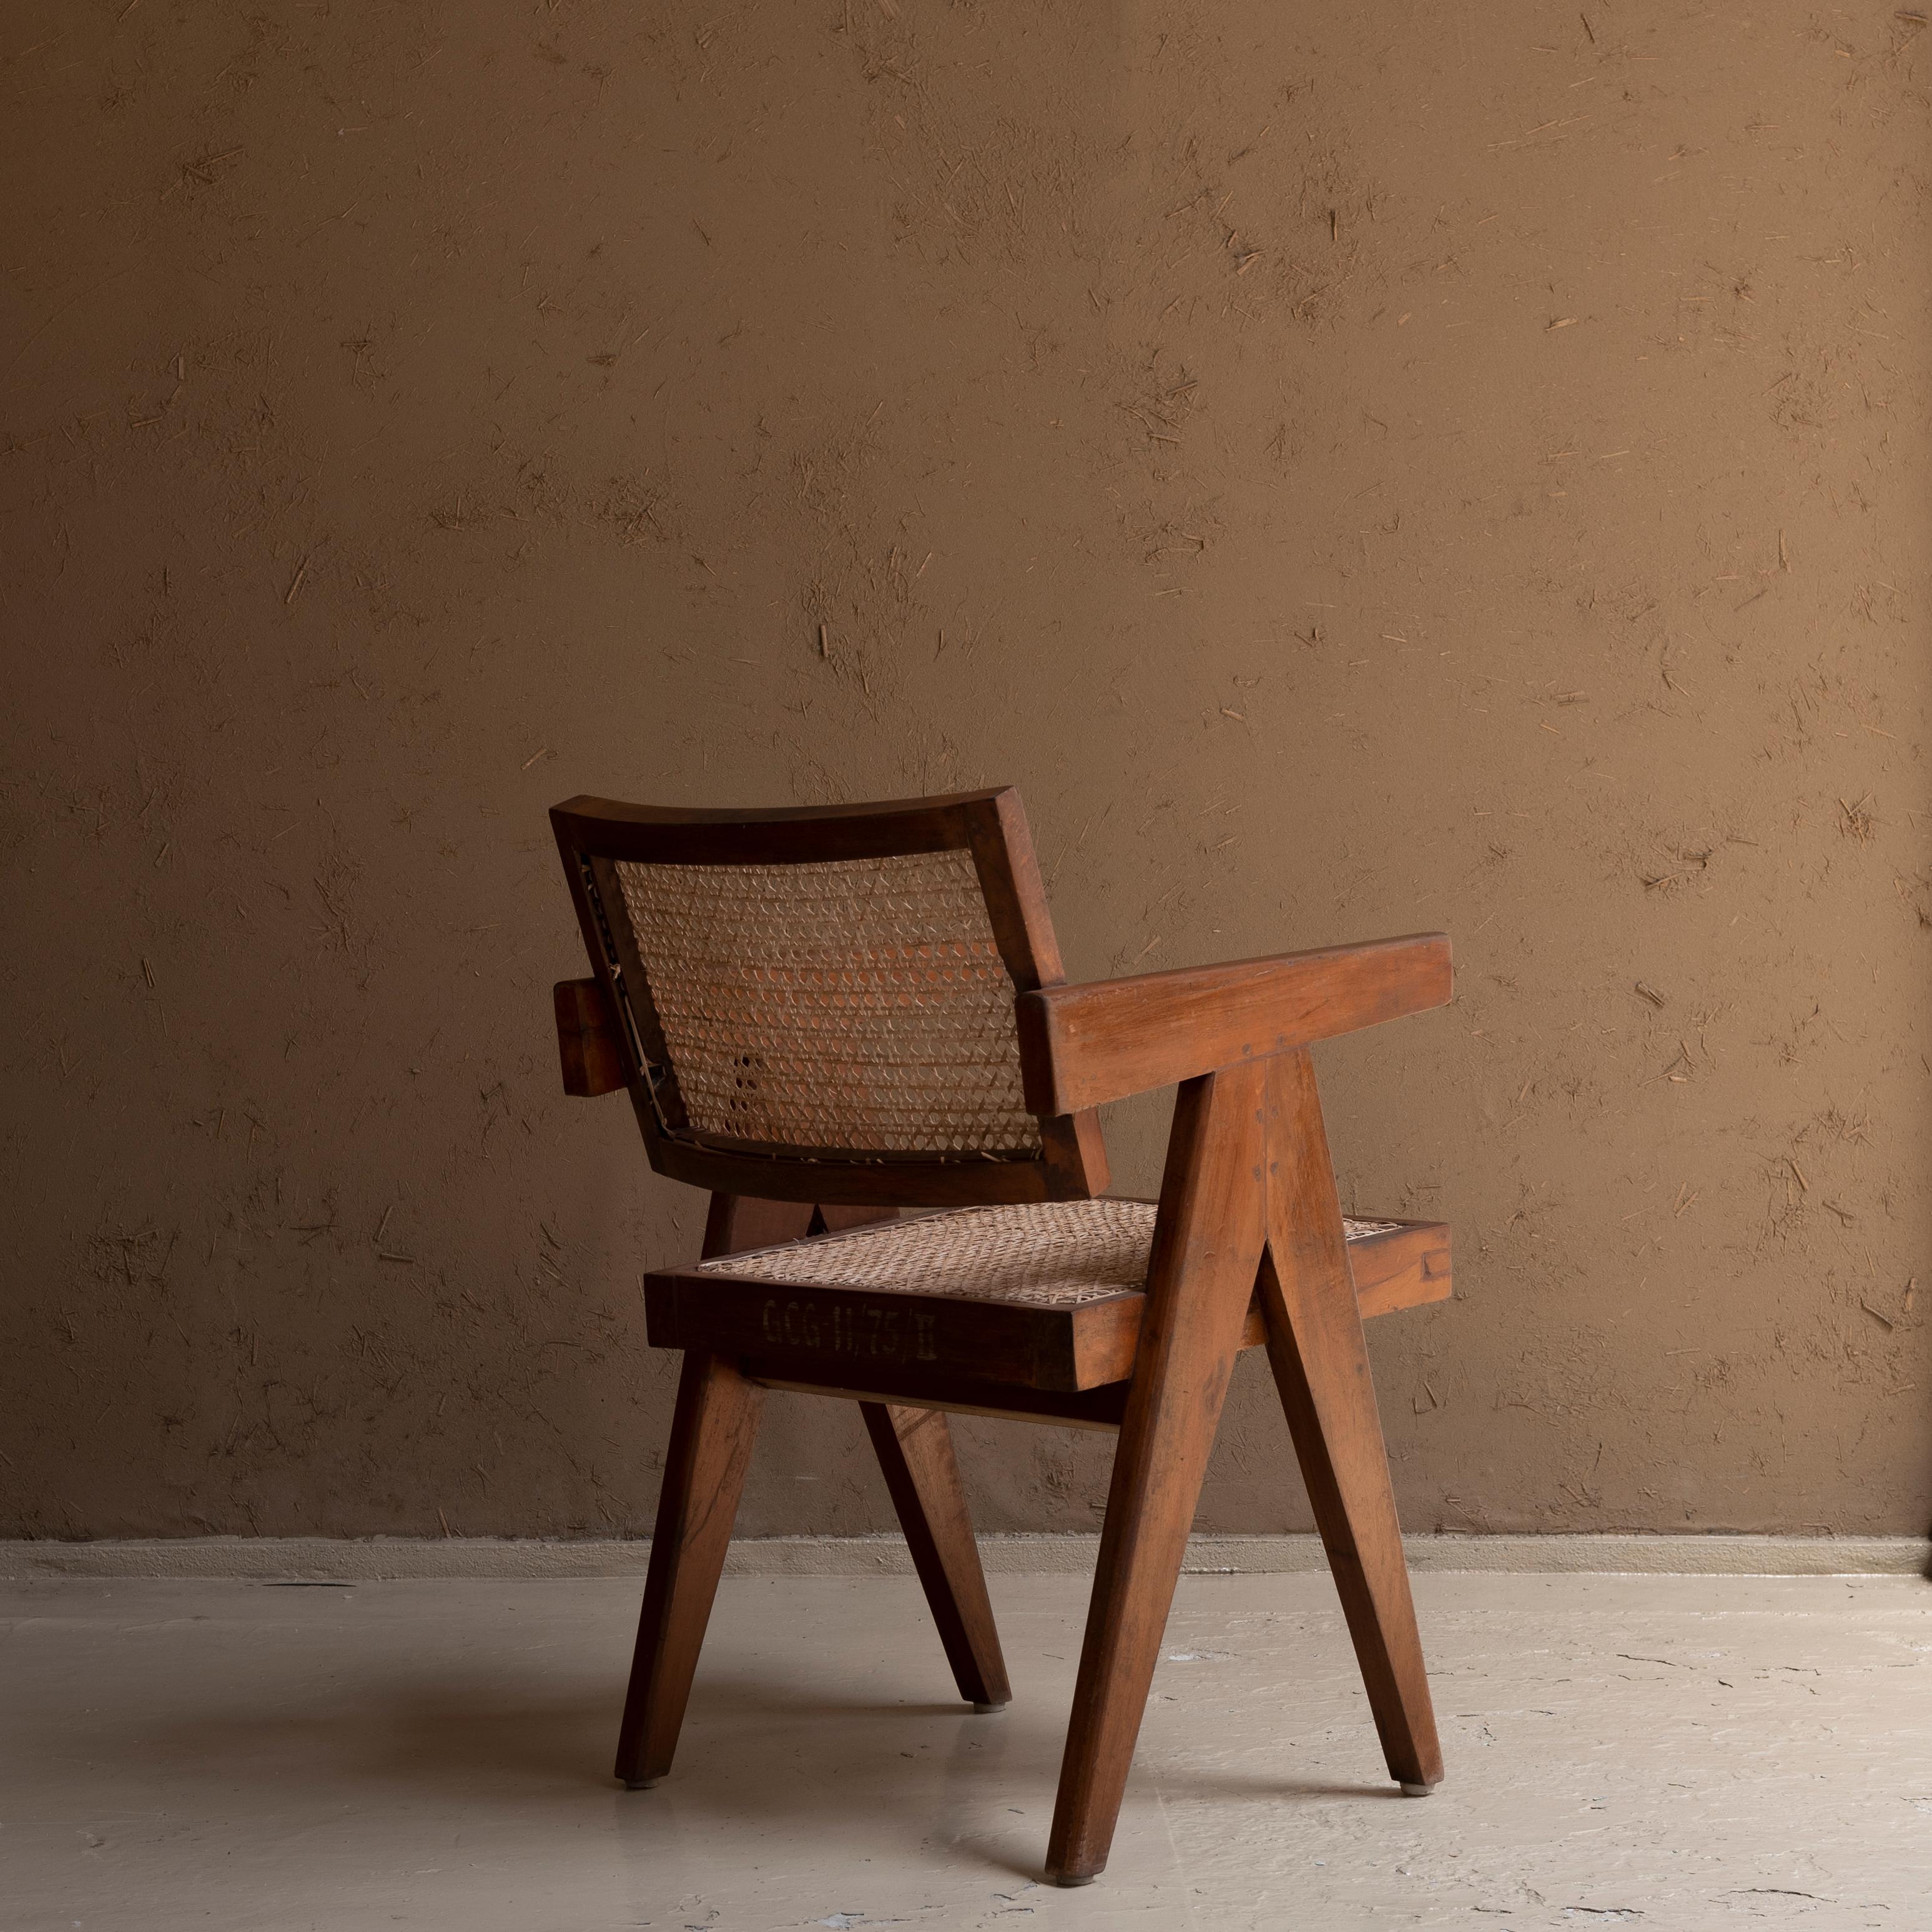 Indian Pierre Jeanneret Office Chair, circa 1955-1956, Chandigarh, India For Sale